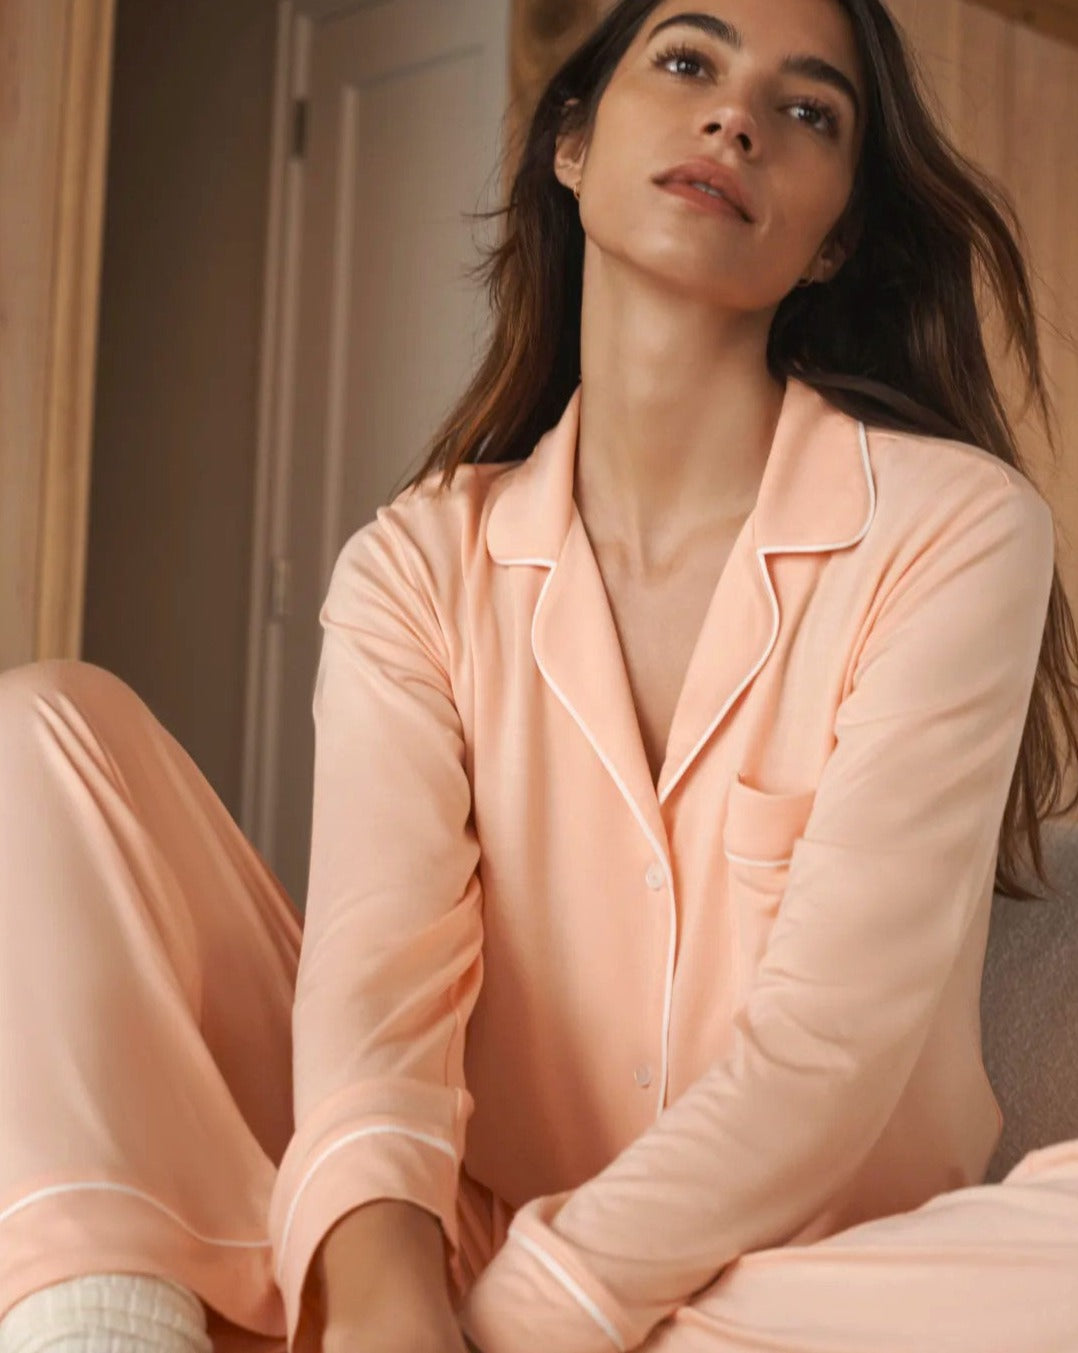 Classic long sleeve luxury pajama set with button front, collar and contrast piping in soft and comfortable petal pink modal jersey.